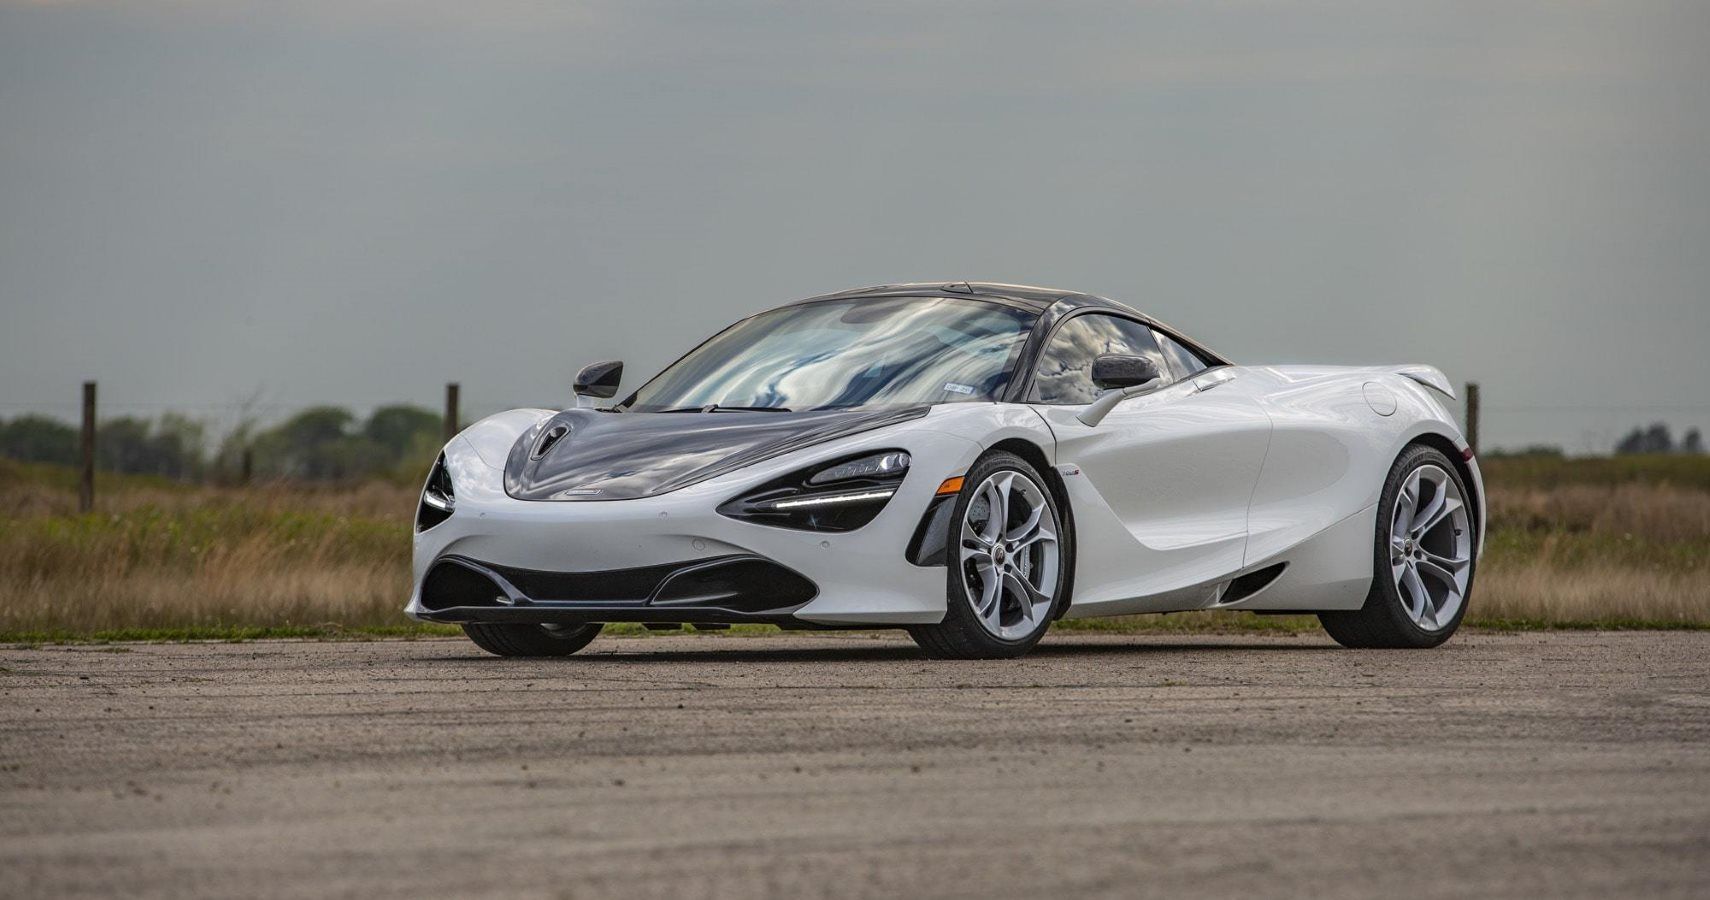 Hennessey Performance Shows Off New Upgrade For McLaren 720S